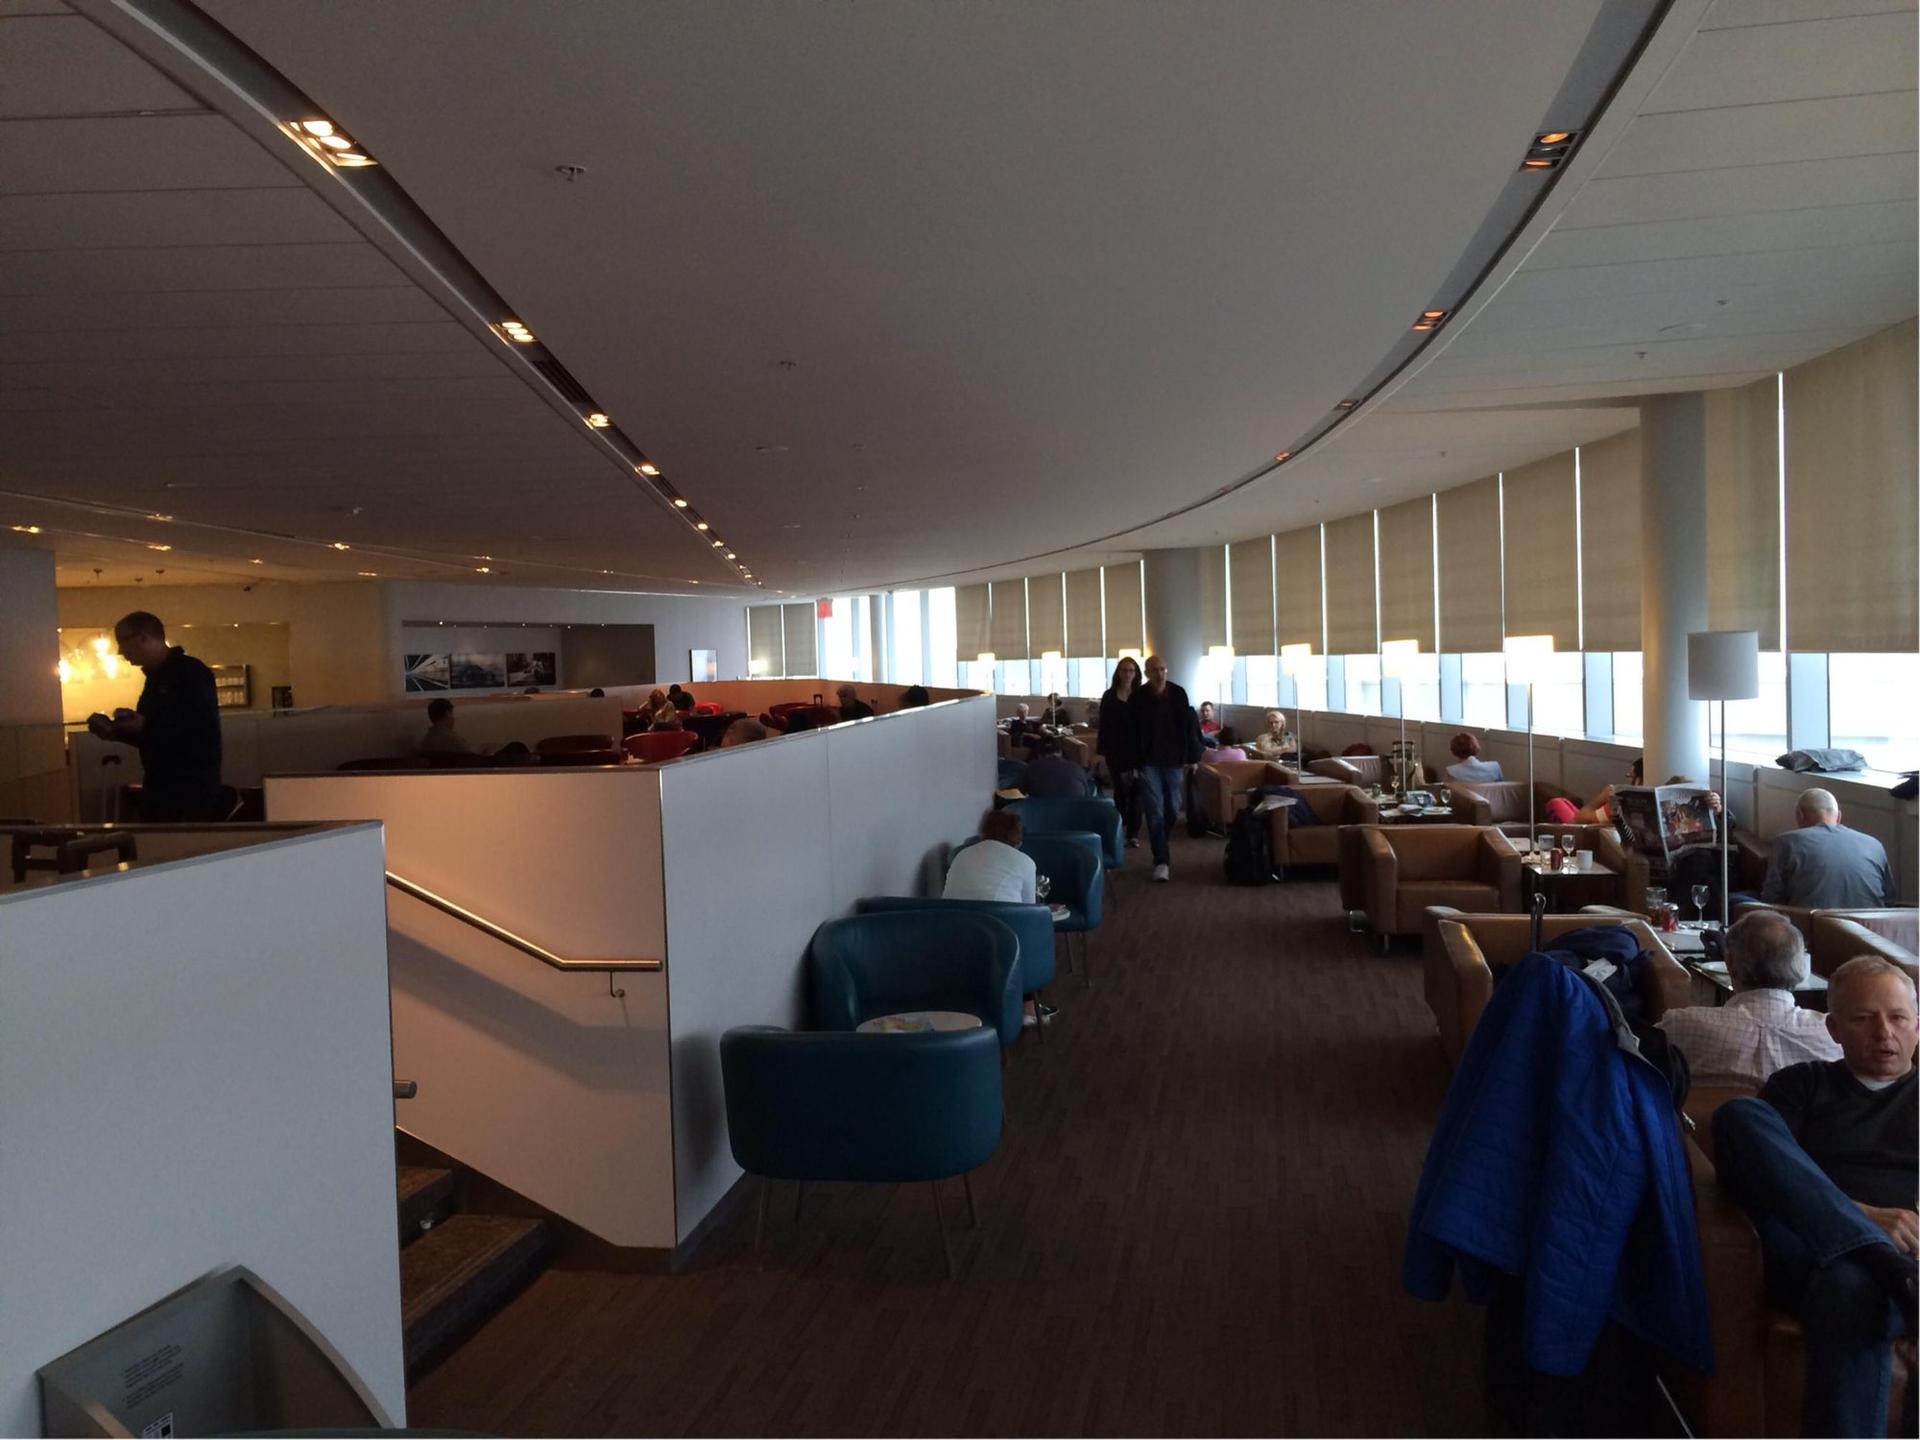 Air Canada Maple Leaf Lounge image 3 of 30